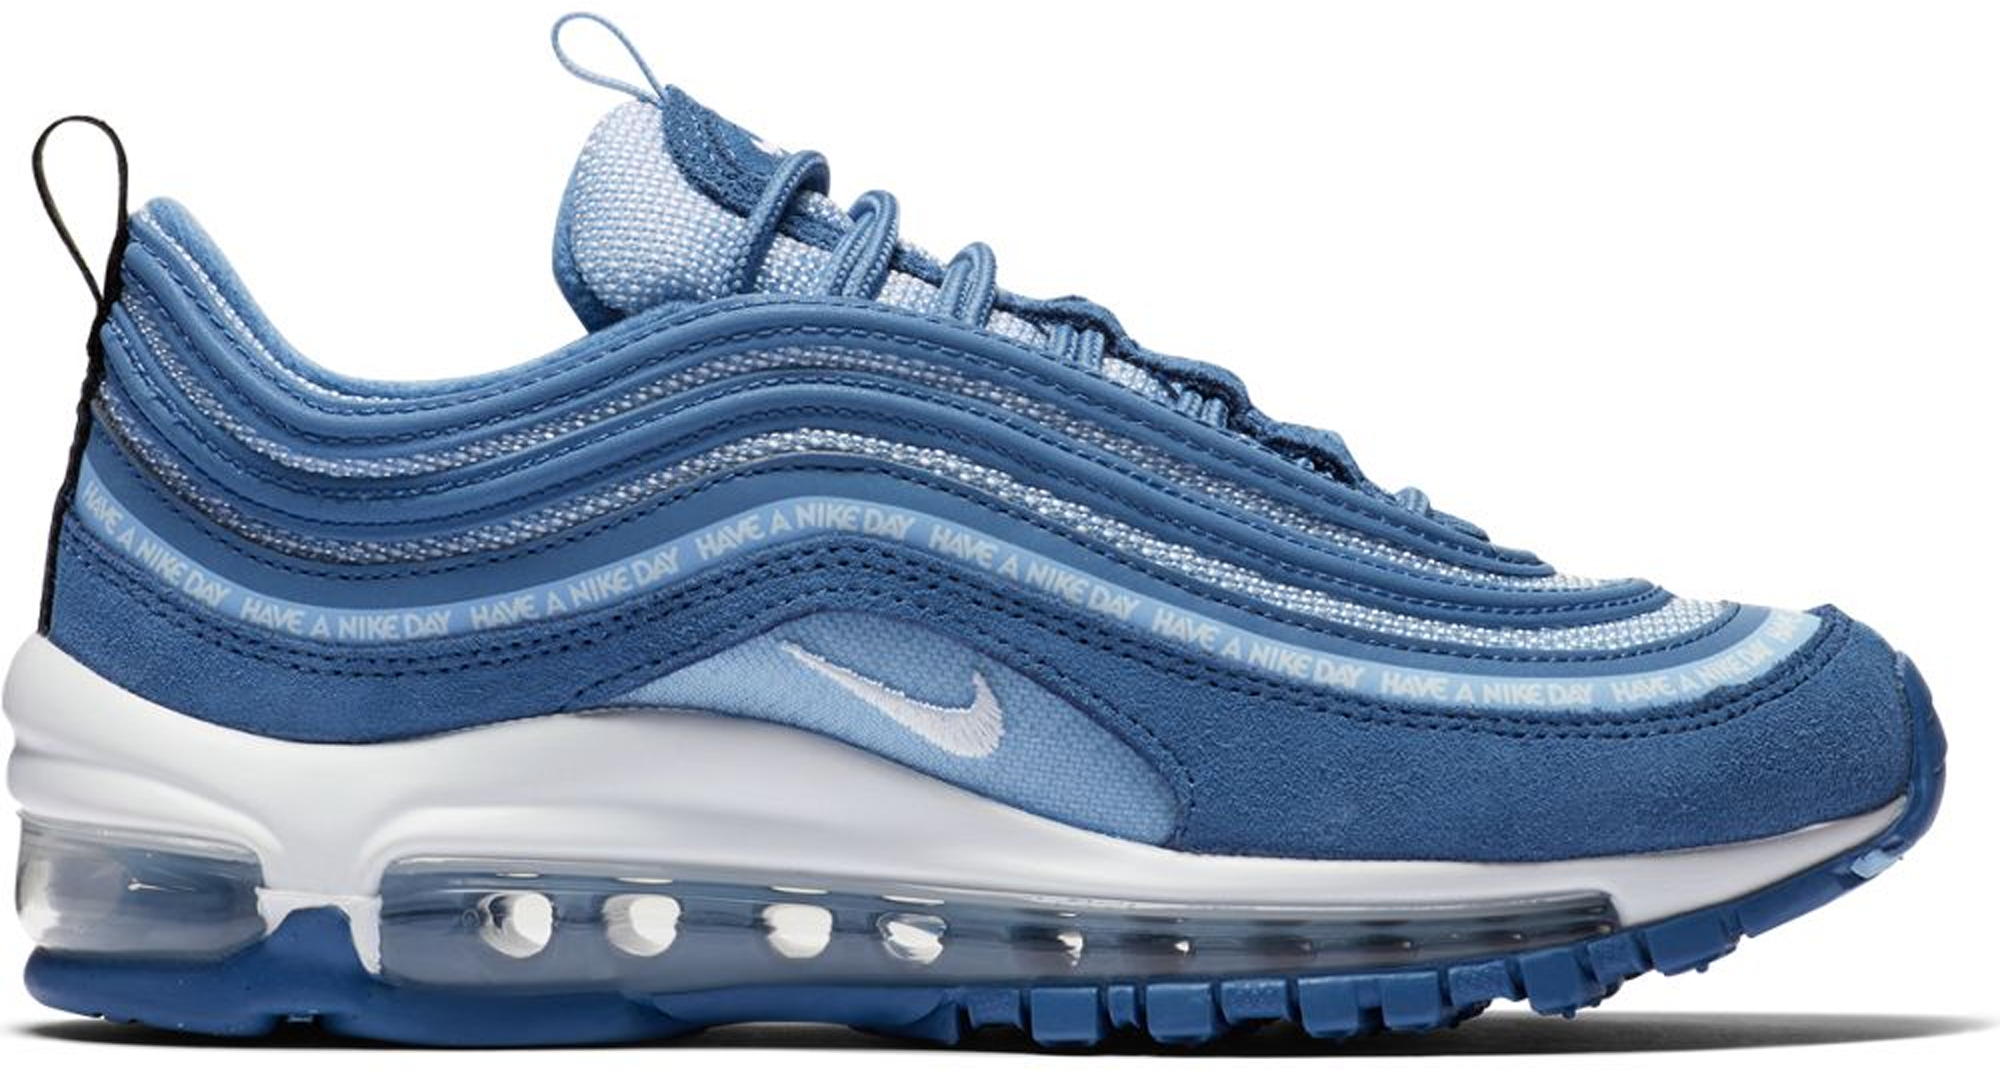 have a nike day nike air max 97